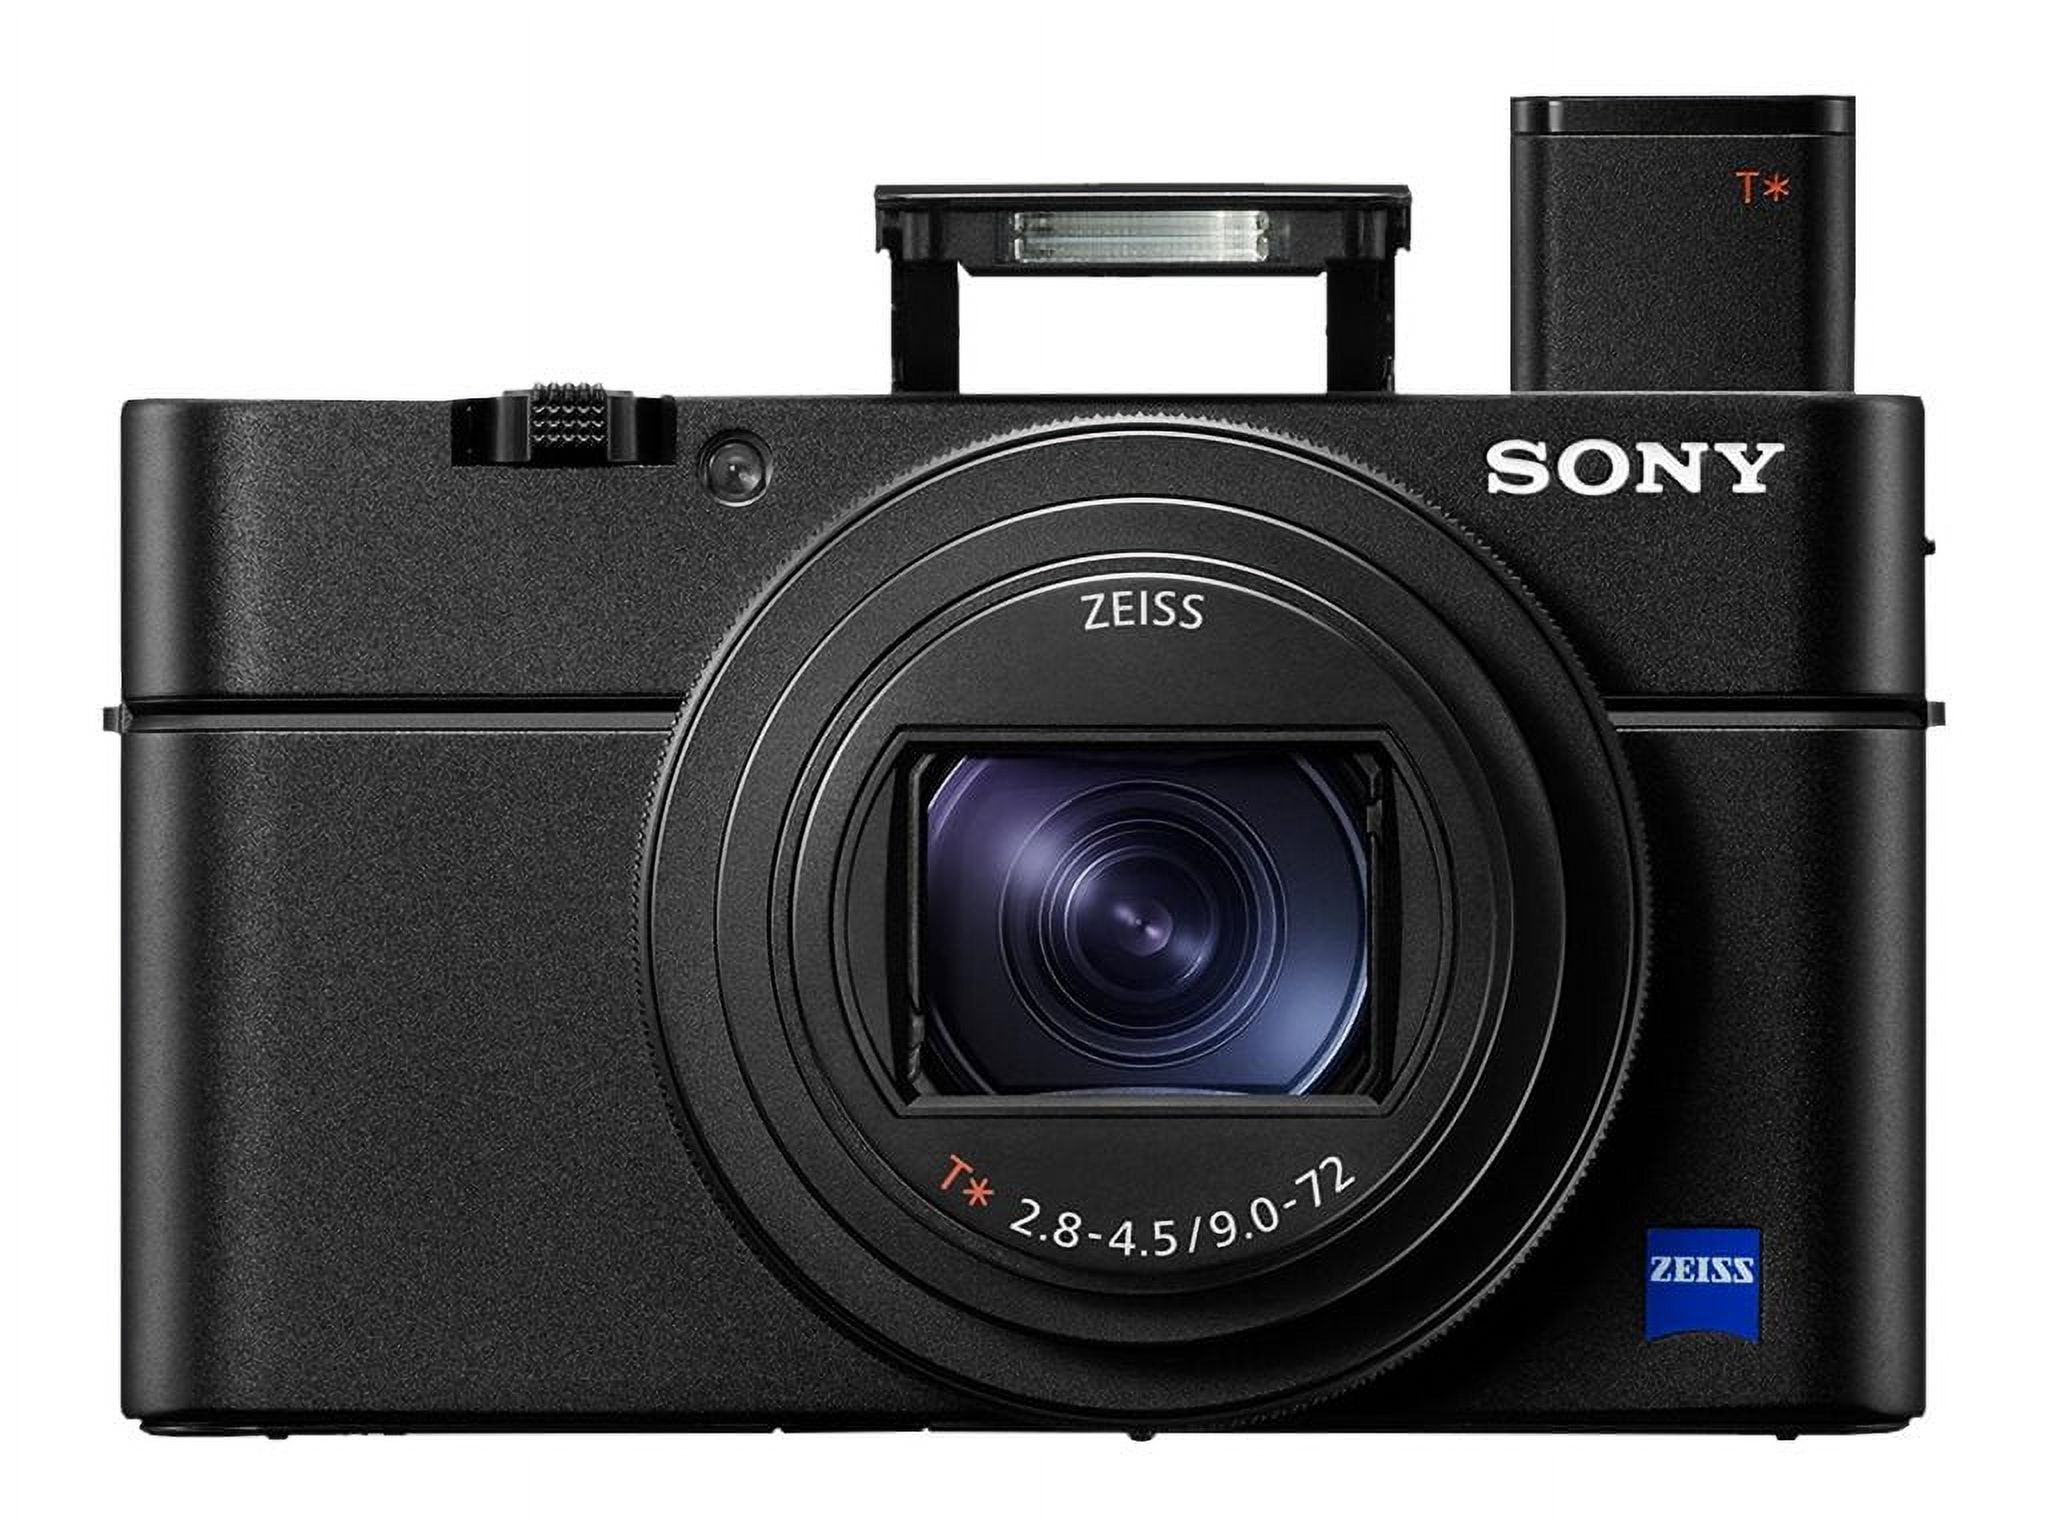 Sony Cyber-shot DSC-RX100 VII - Digital camera - compact - 20.1 MP - 4K / 30 fps - 8x optical zoom - ZEISS - Wi-Fi, NFC, Bluetooth - black - with Sony VCT-SGR1 Shooting Grip - image 4 of 15